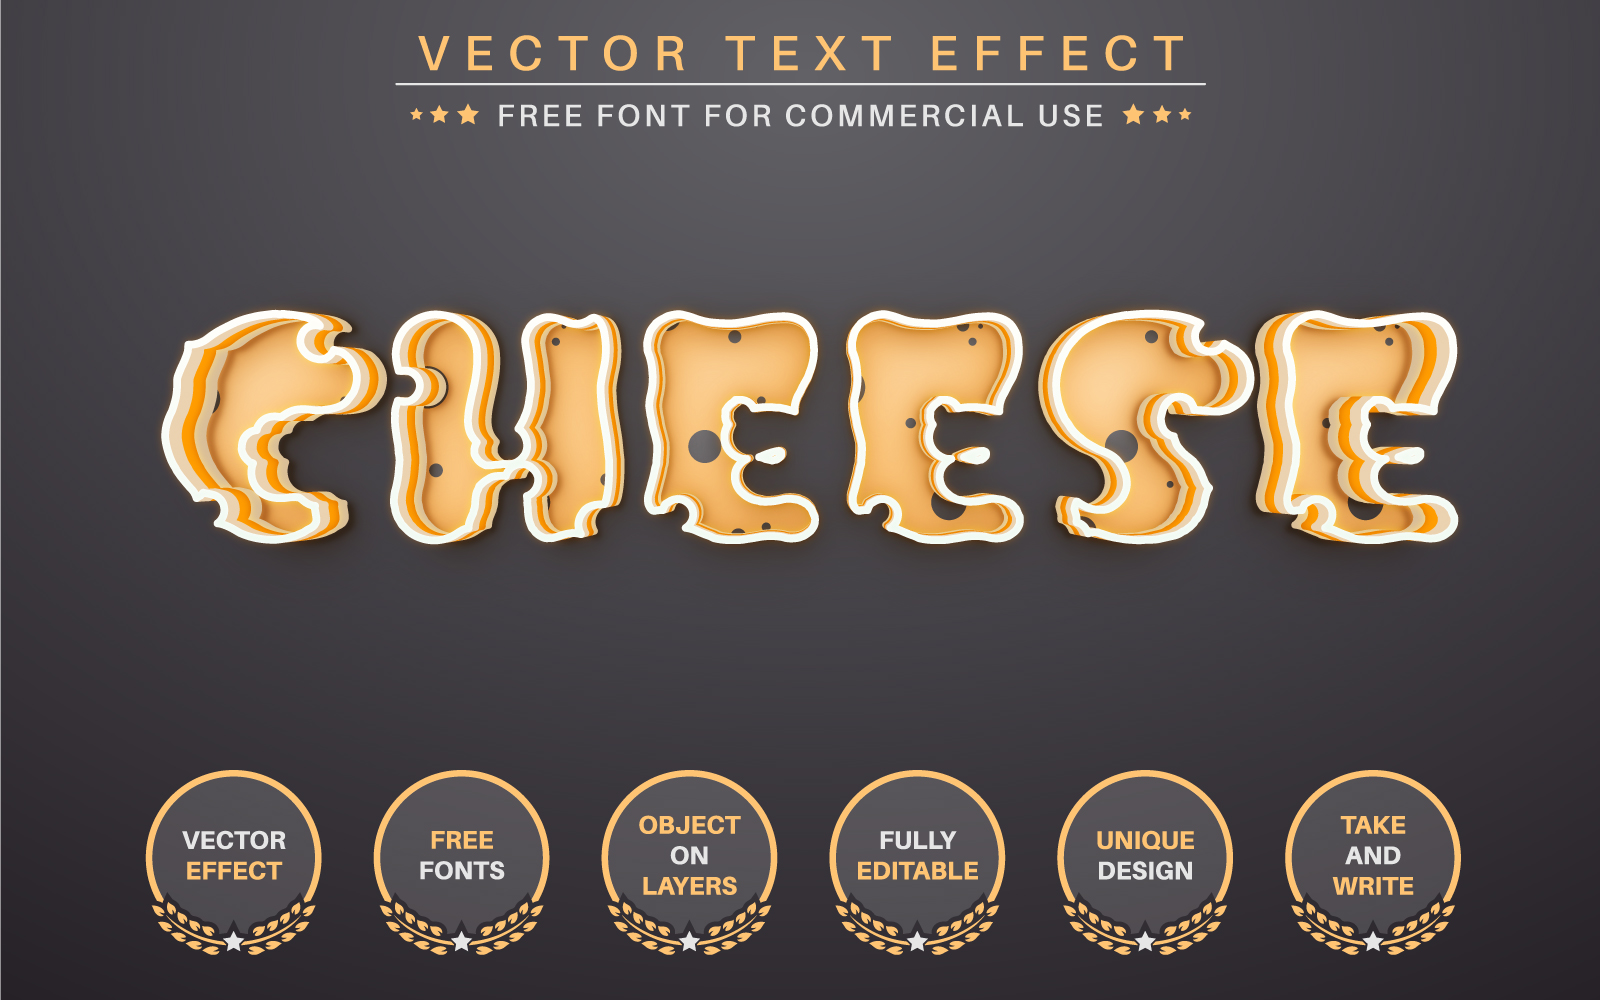 Cheese - Editable Text Effect, Font Style, Graphics Illustration